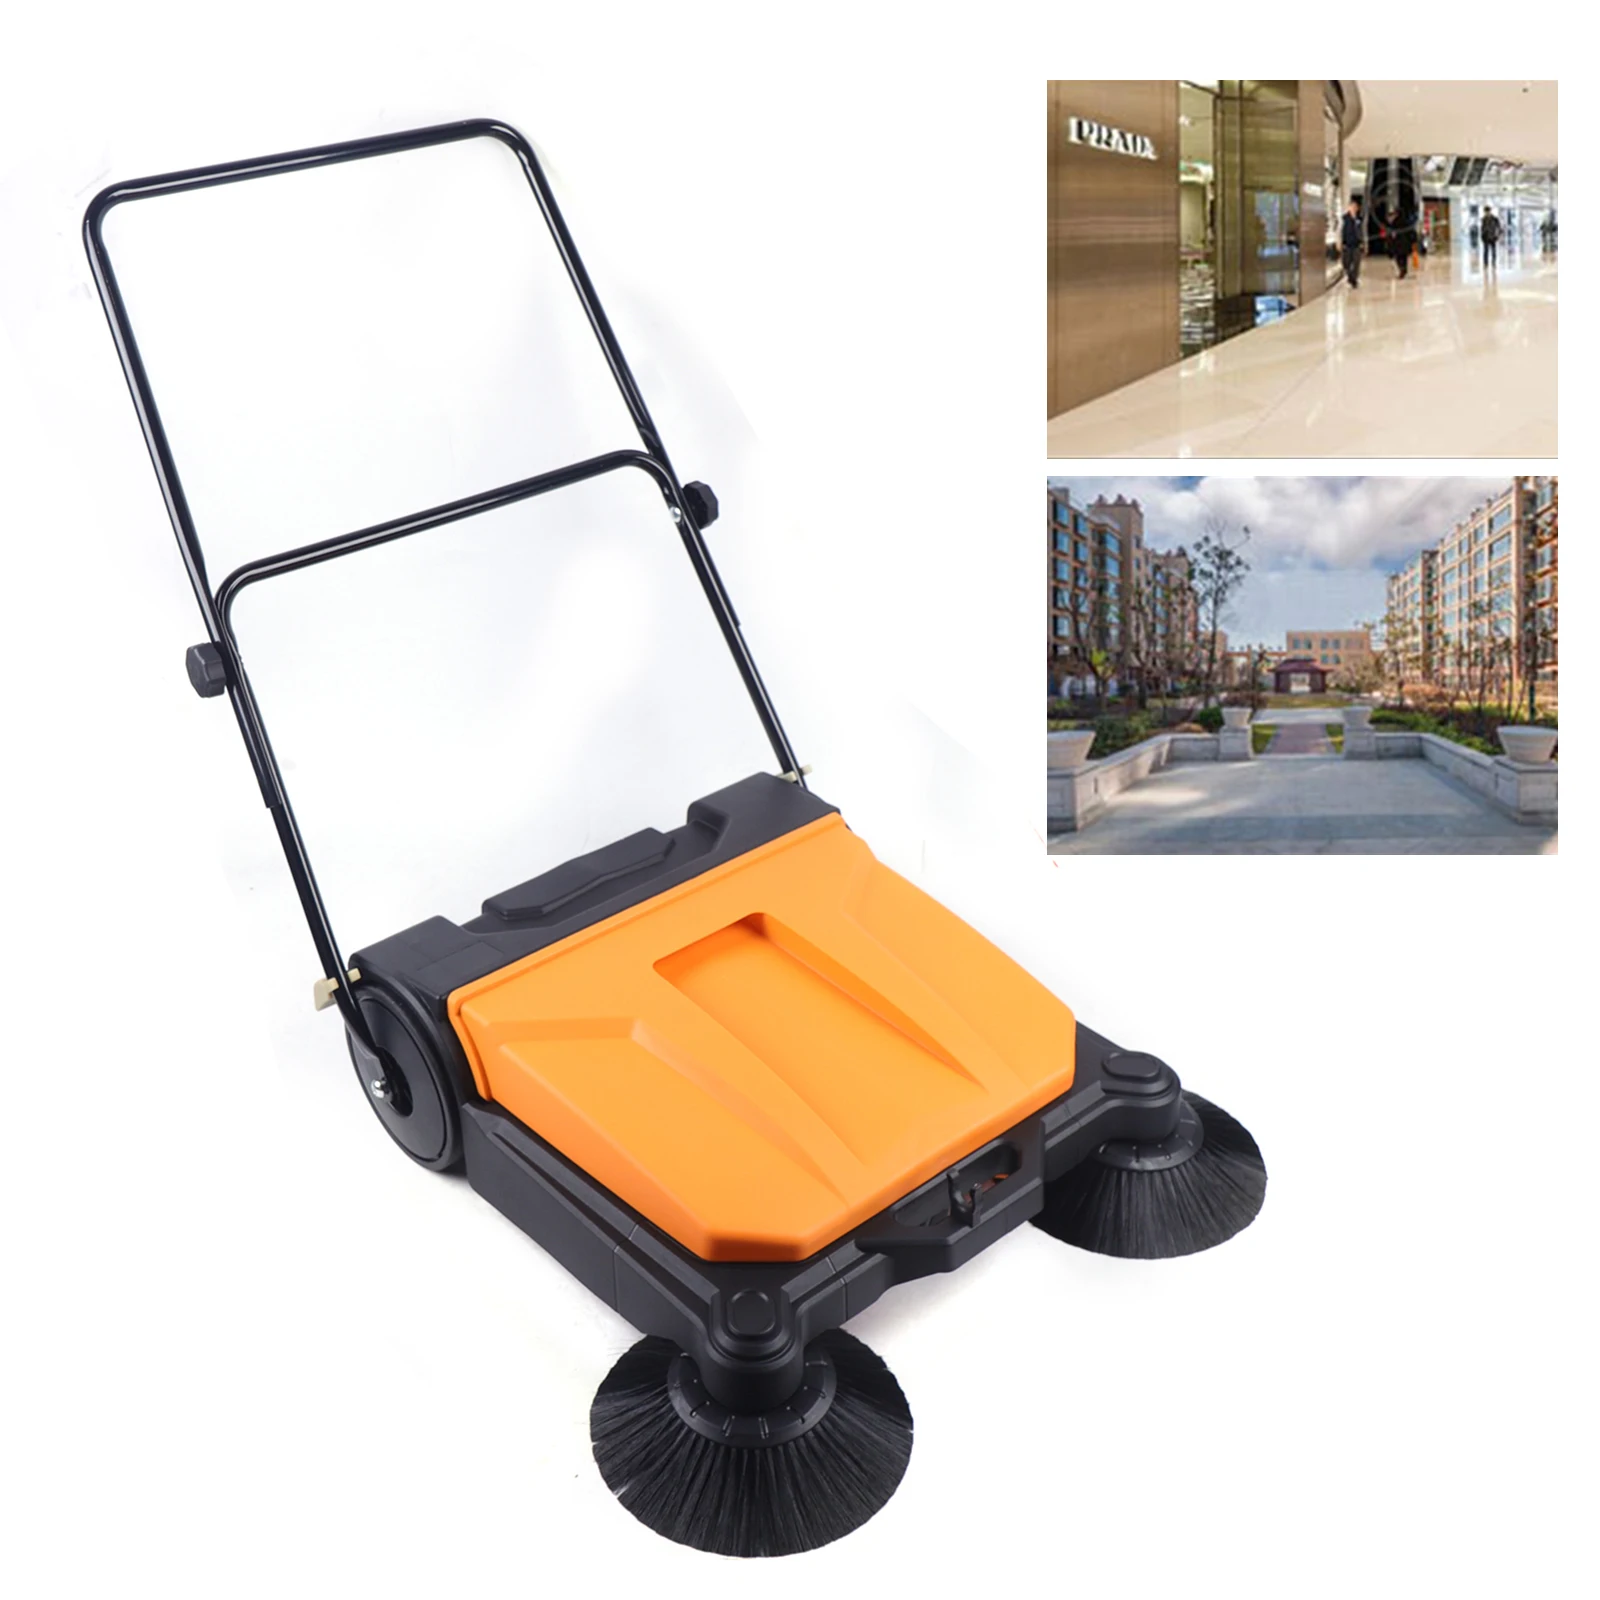 

Commercial Walk Behind Sweeper 26" Industrial Hand Push Floor Sweeper Foldable Manual Sweeping Machine for Garage Hotel